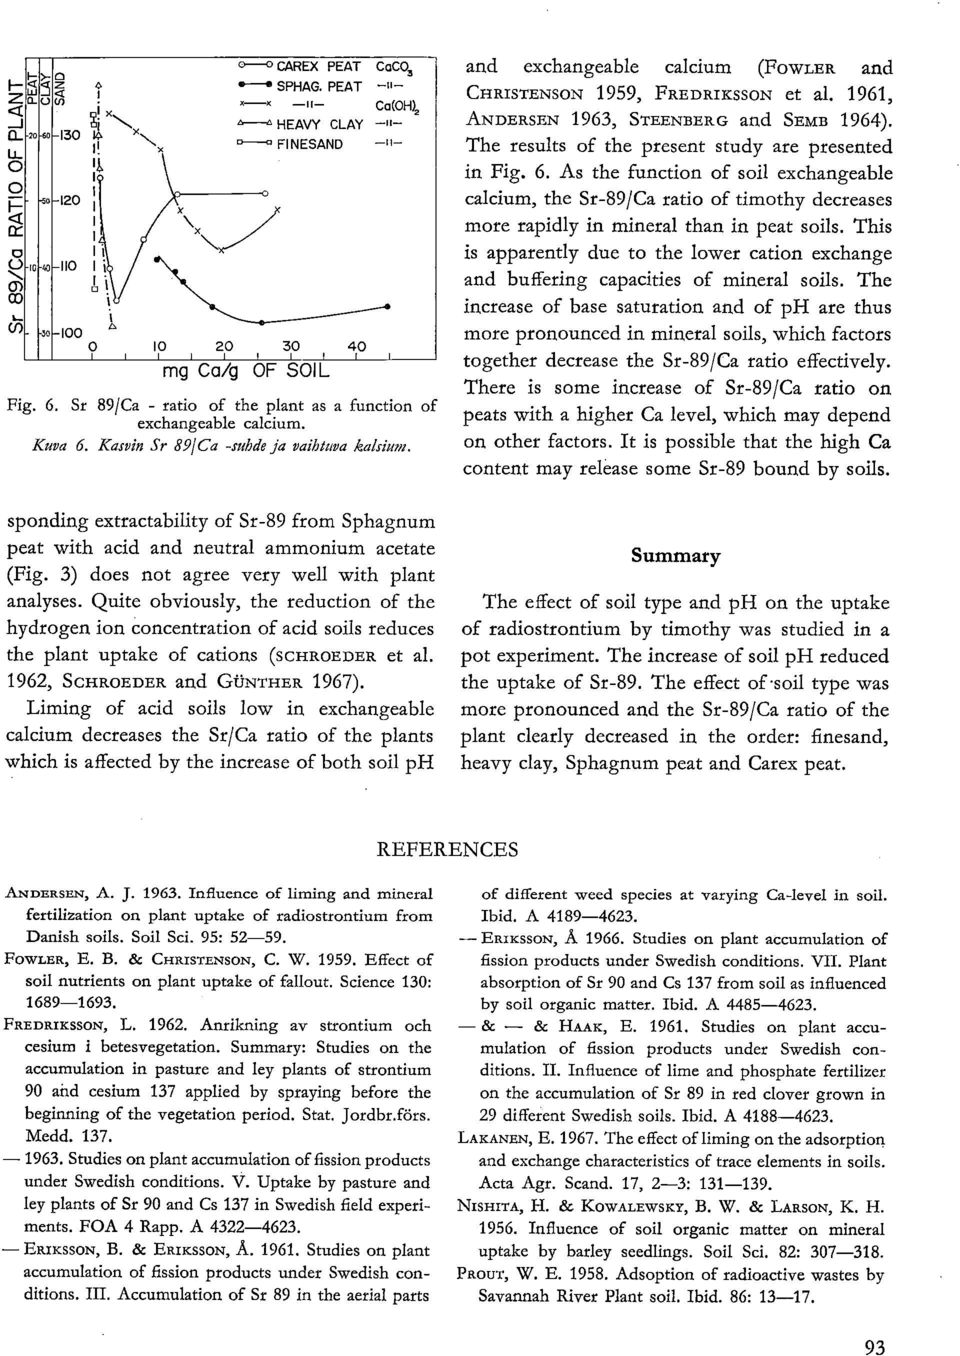 Quite obviously, the reduction of the hydrogen ion concentration of acid soils reduces the plant uptake of cations (SCHROEDER et al. 1962, SCHROEDER and Gt.YNTHER 1967).